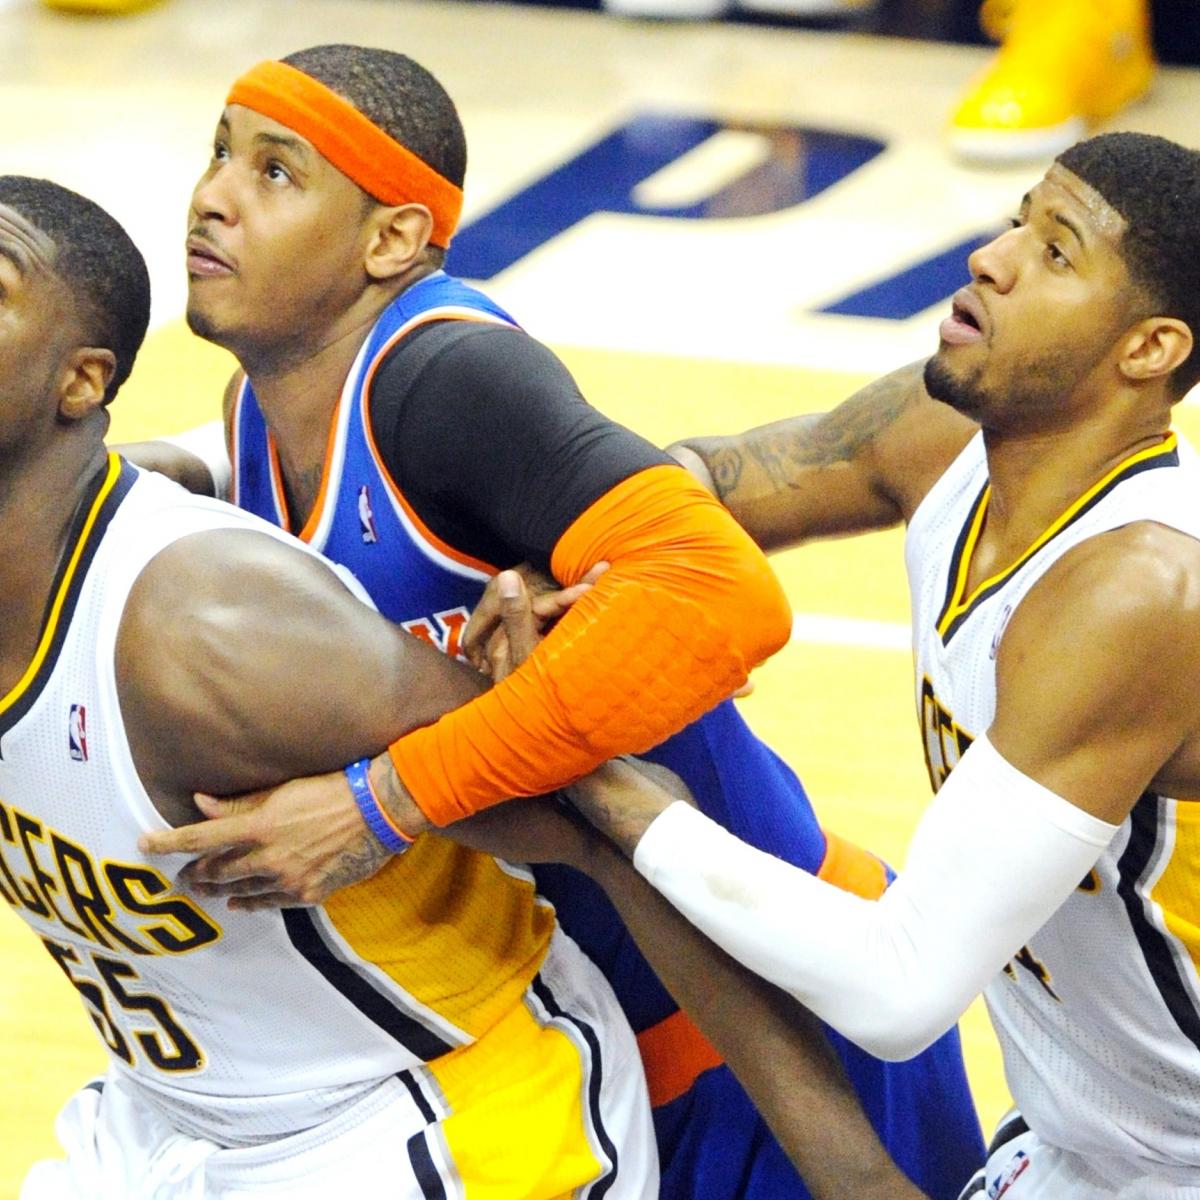 New York Knicks vs. Indiana Pacers Game 4 Preview, Schedule and